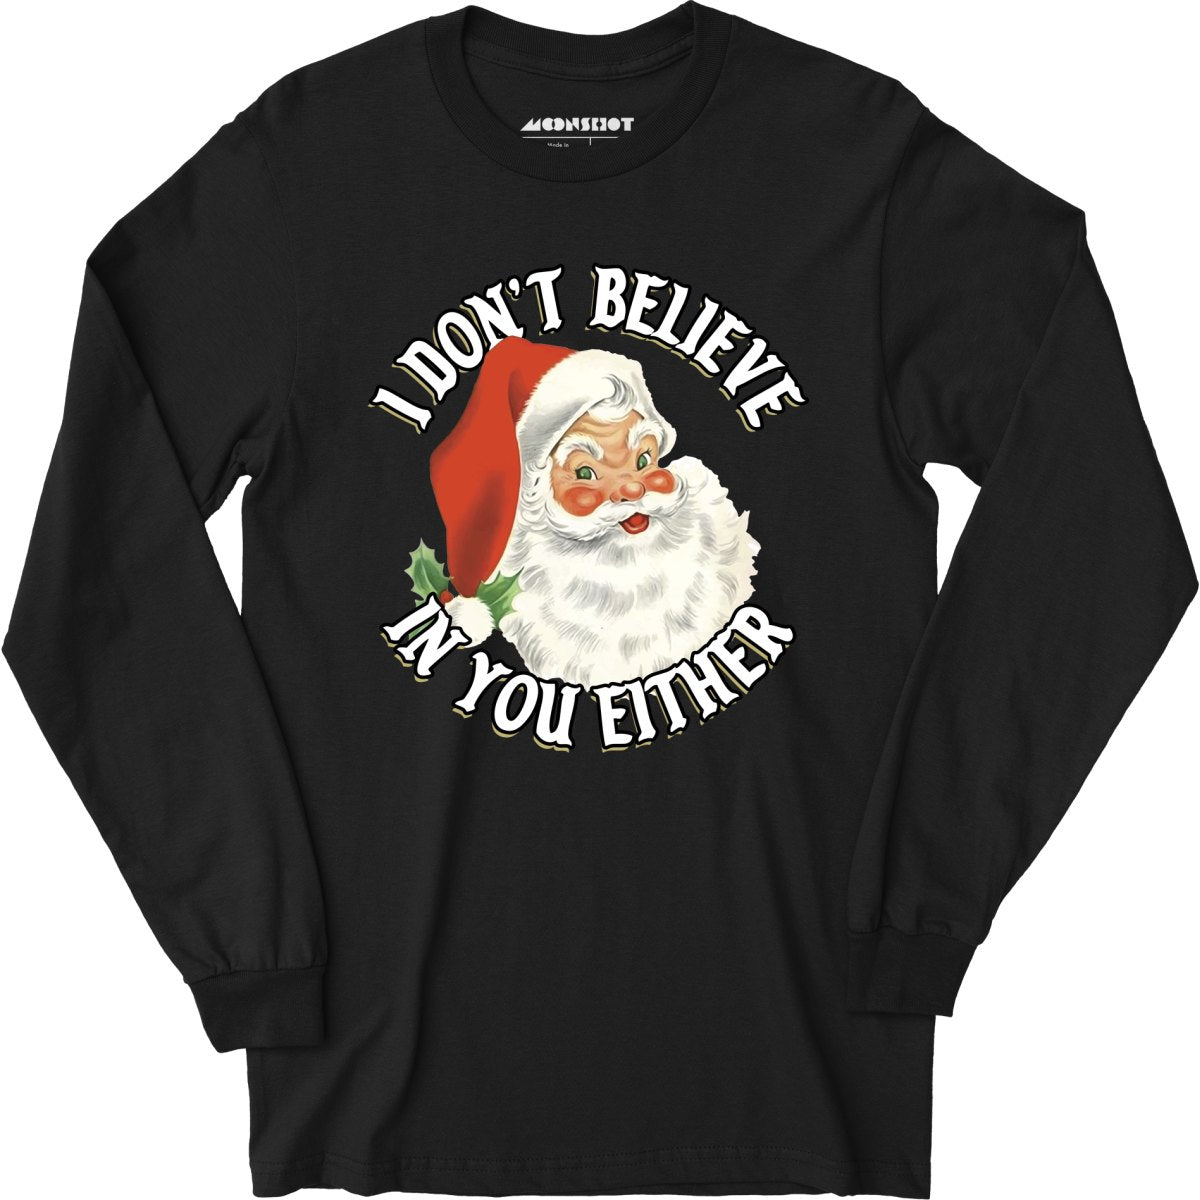 I Don't Believe in You Either - Long Sleeve T-Shirt